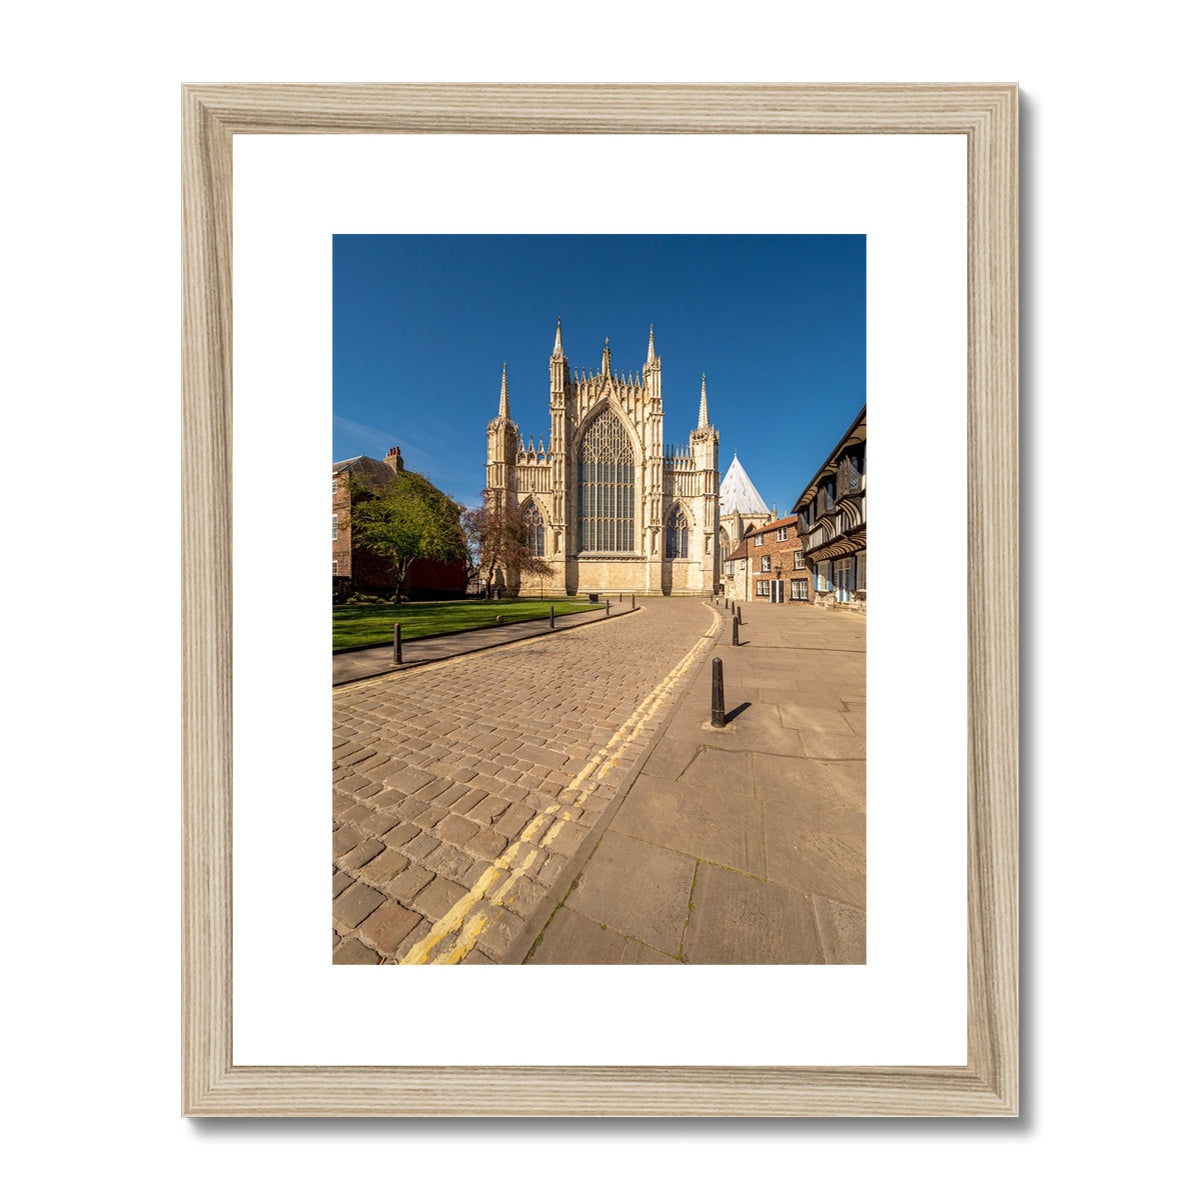 The Great East Window of York Minster seen from College Street,York. UK Framed & Mounted Print